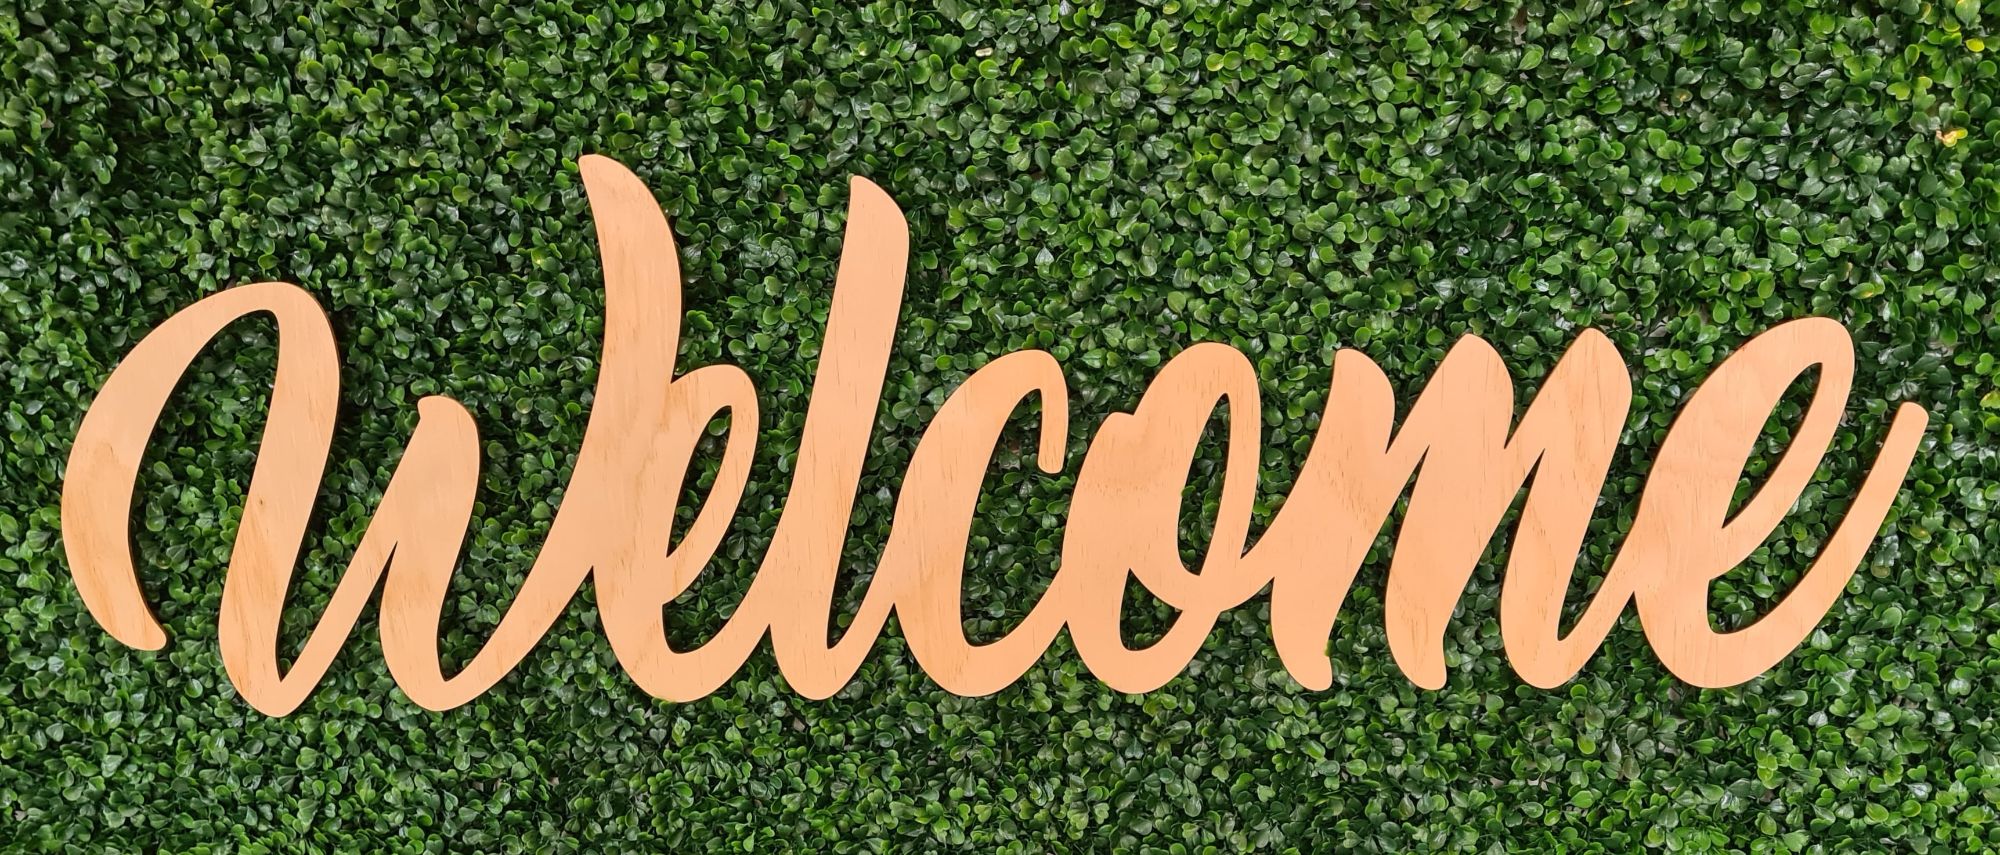 A cursive "Welcome" sign made of wood, sitting on top of green plants, providing a contrast between the maple-looking wood and green manicured plants.